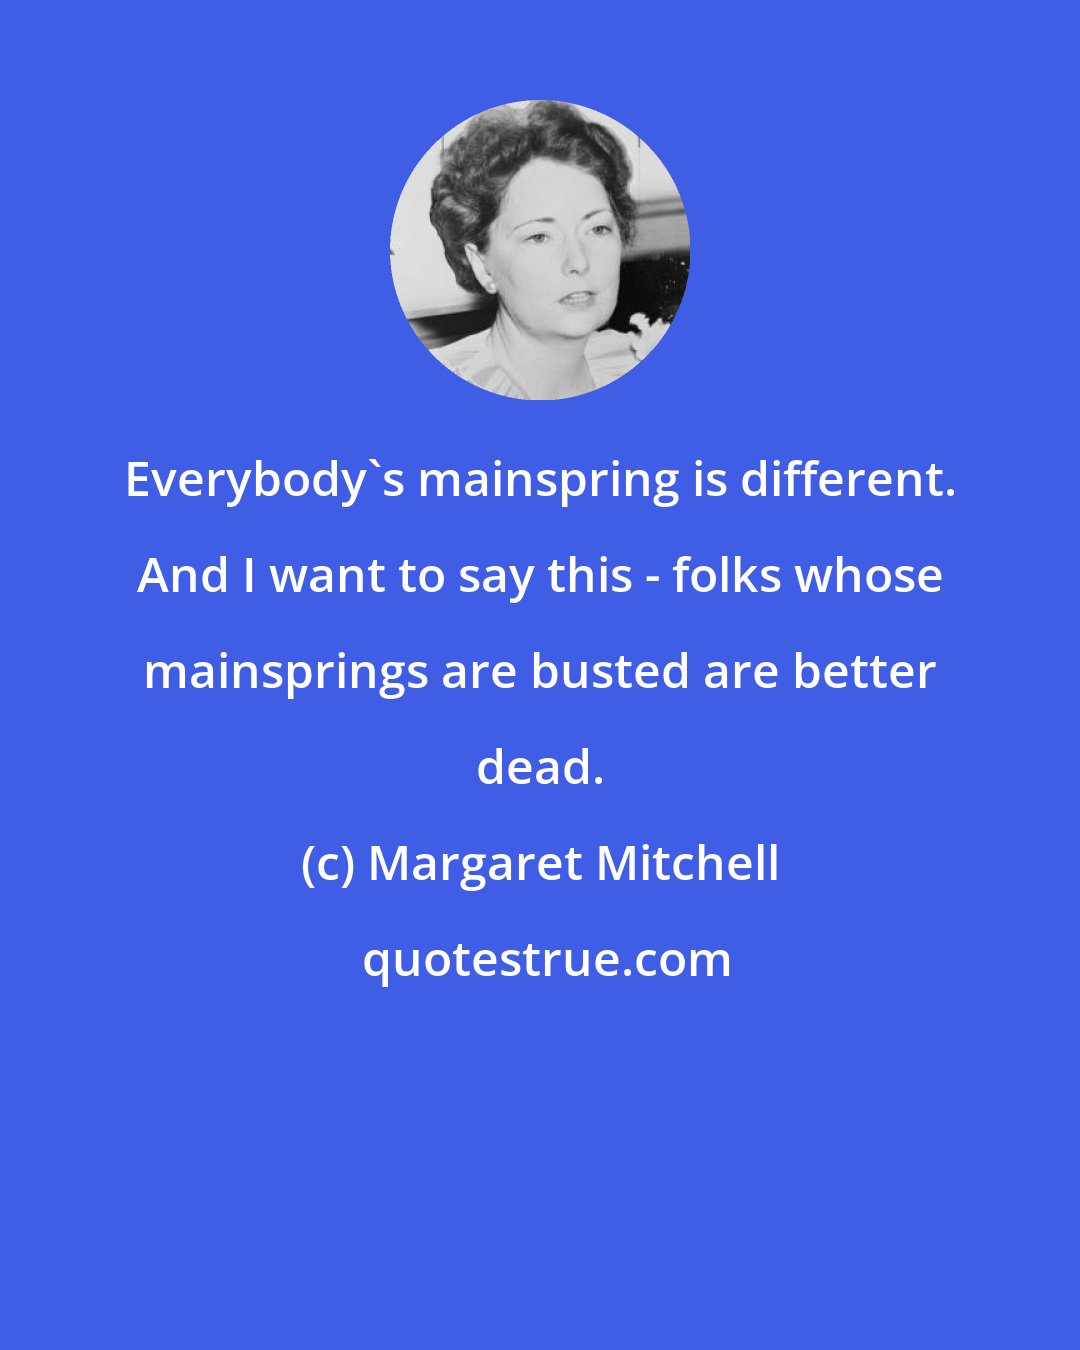 Margaret Mitchell: Everybody's mainspring is different. And I want to say this - folks whose mainsprings are busted are better dead.